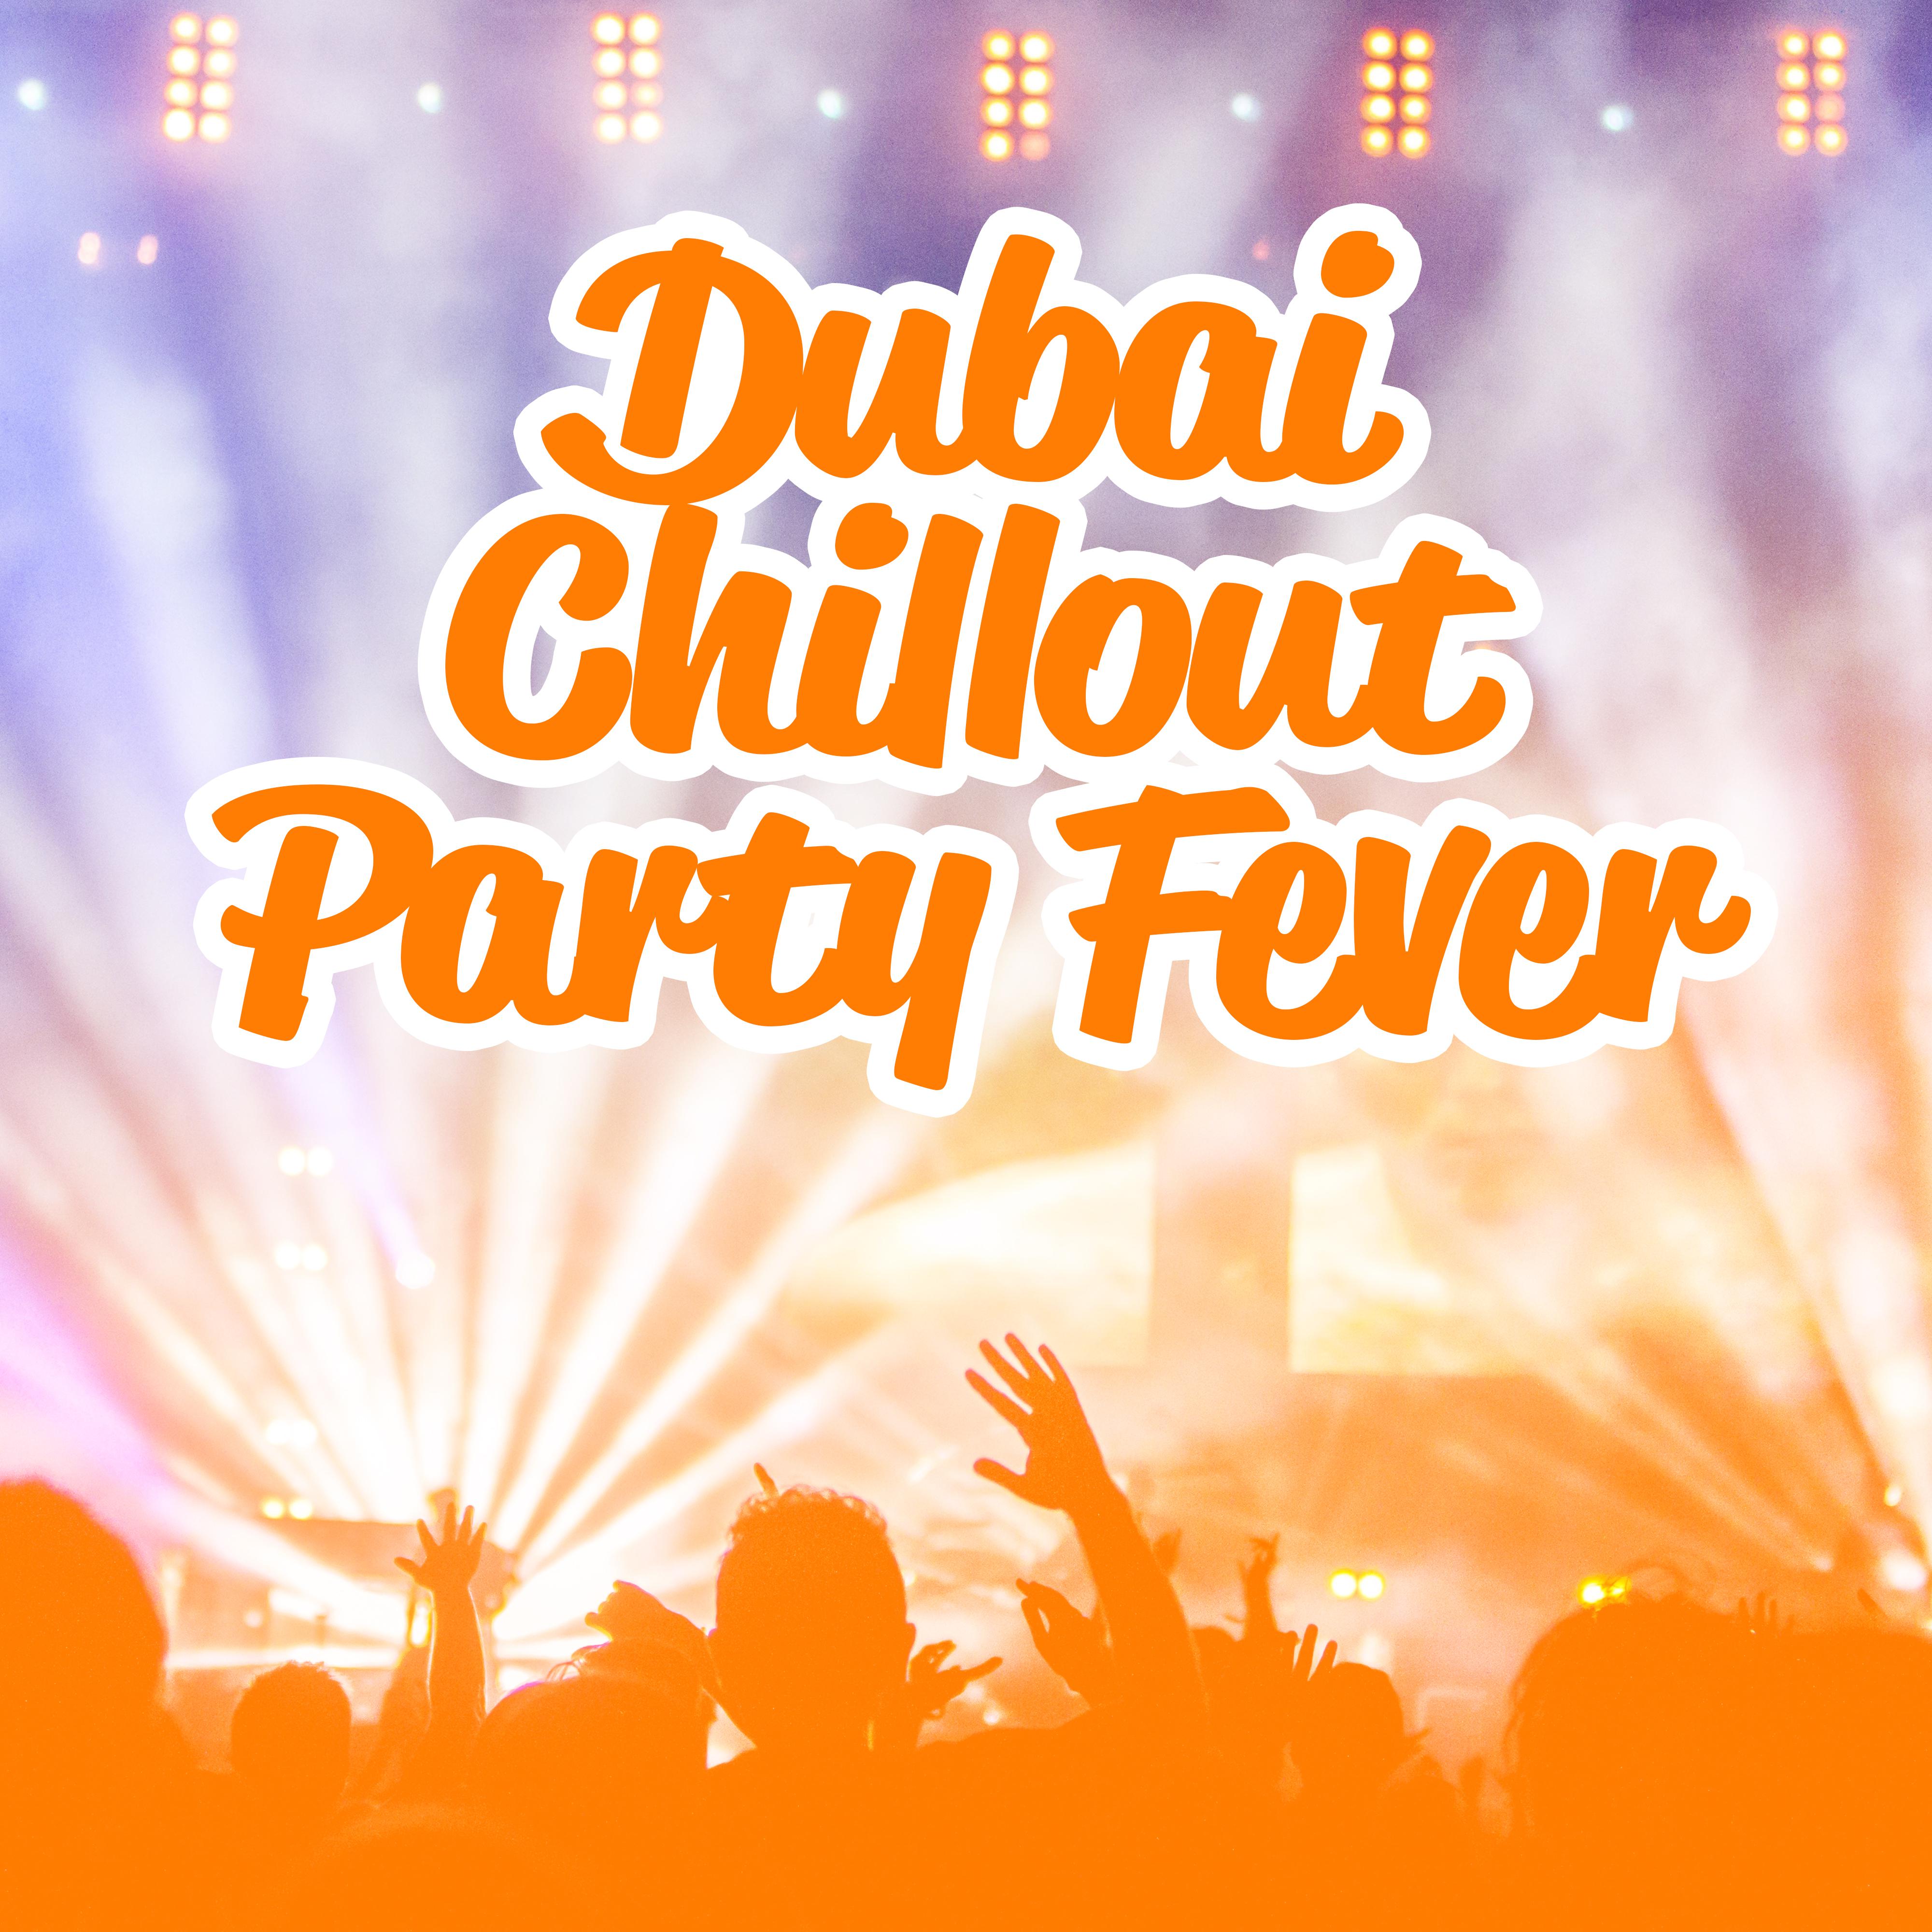 Dubai Chillout Party Fever  Hot Electronic Party Beats Mix 2019